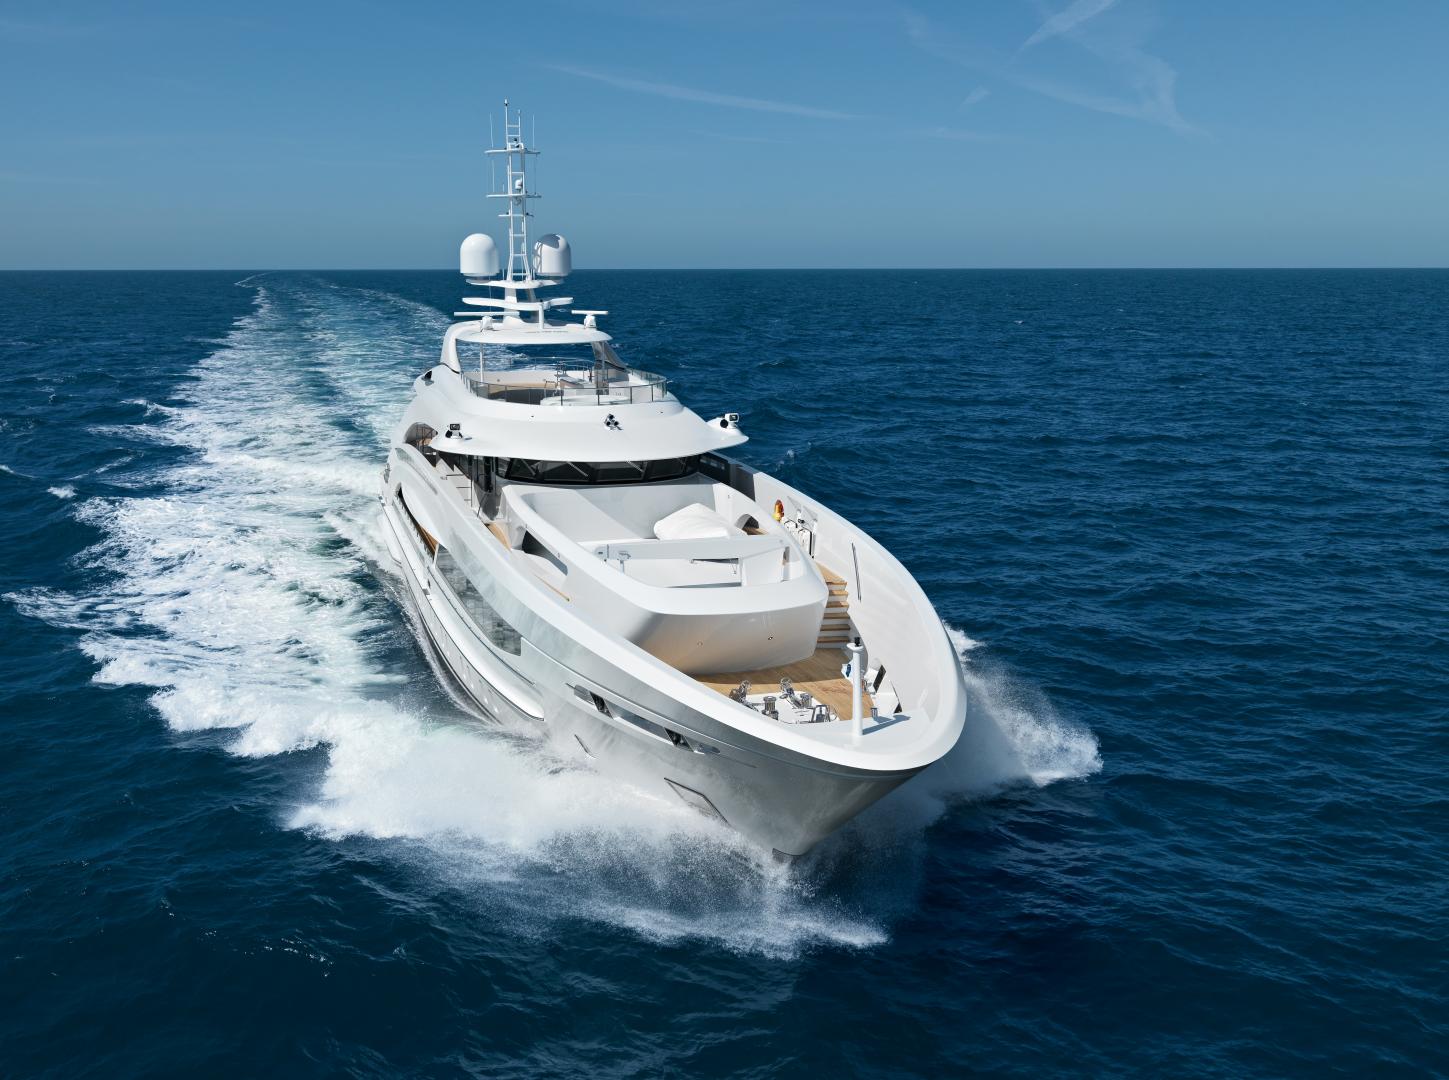 Commercial success at Heesen: YN 18850 Project Triton is sold